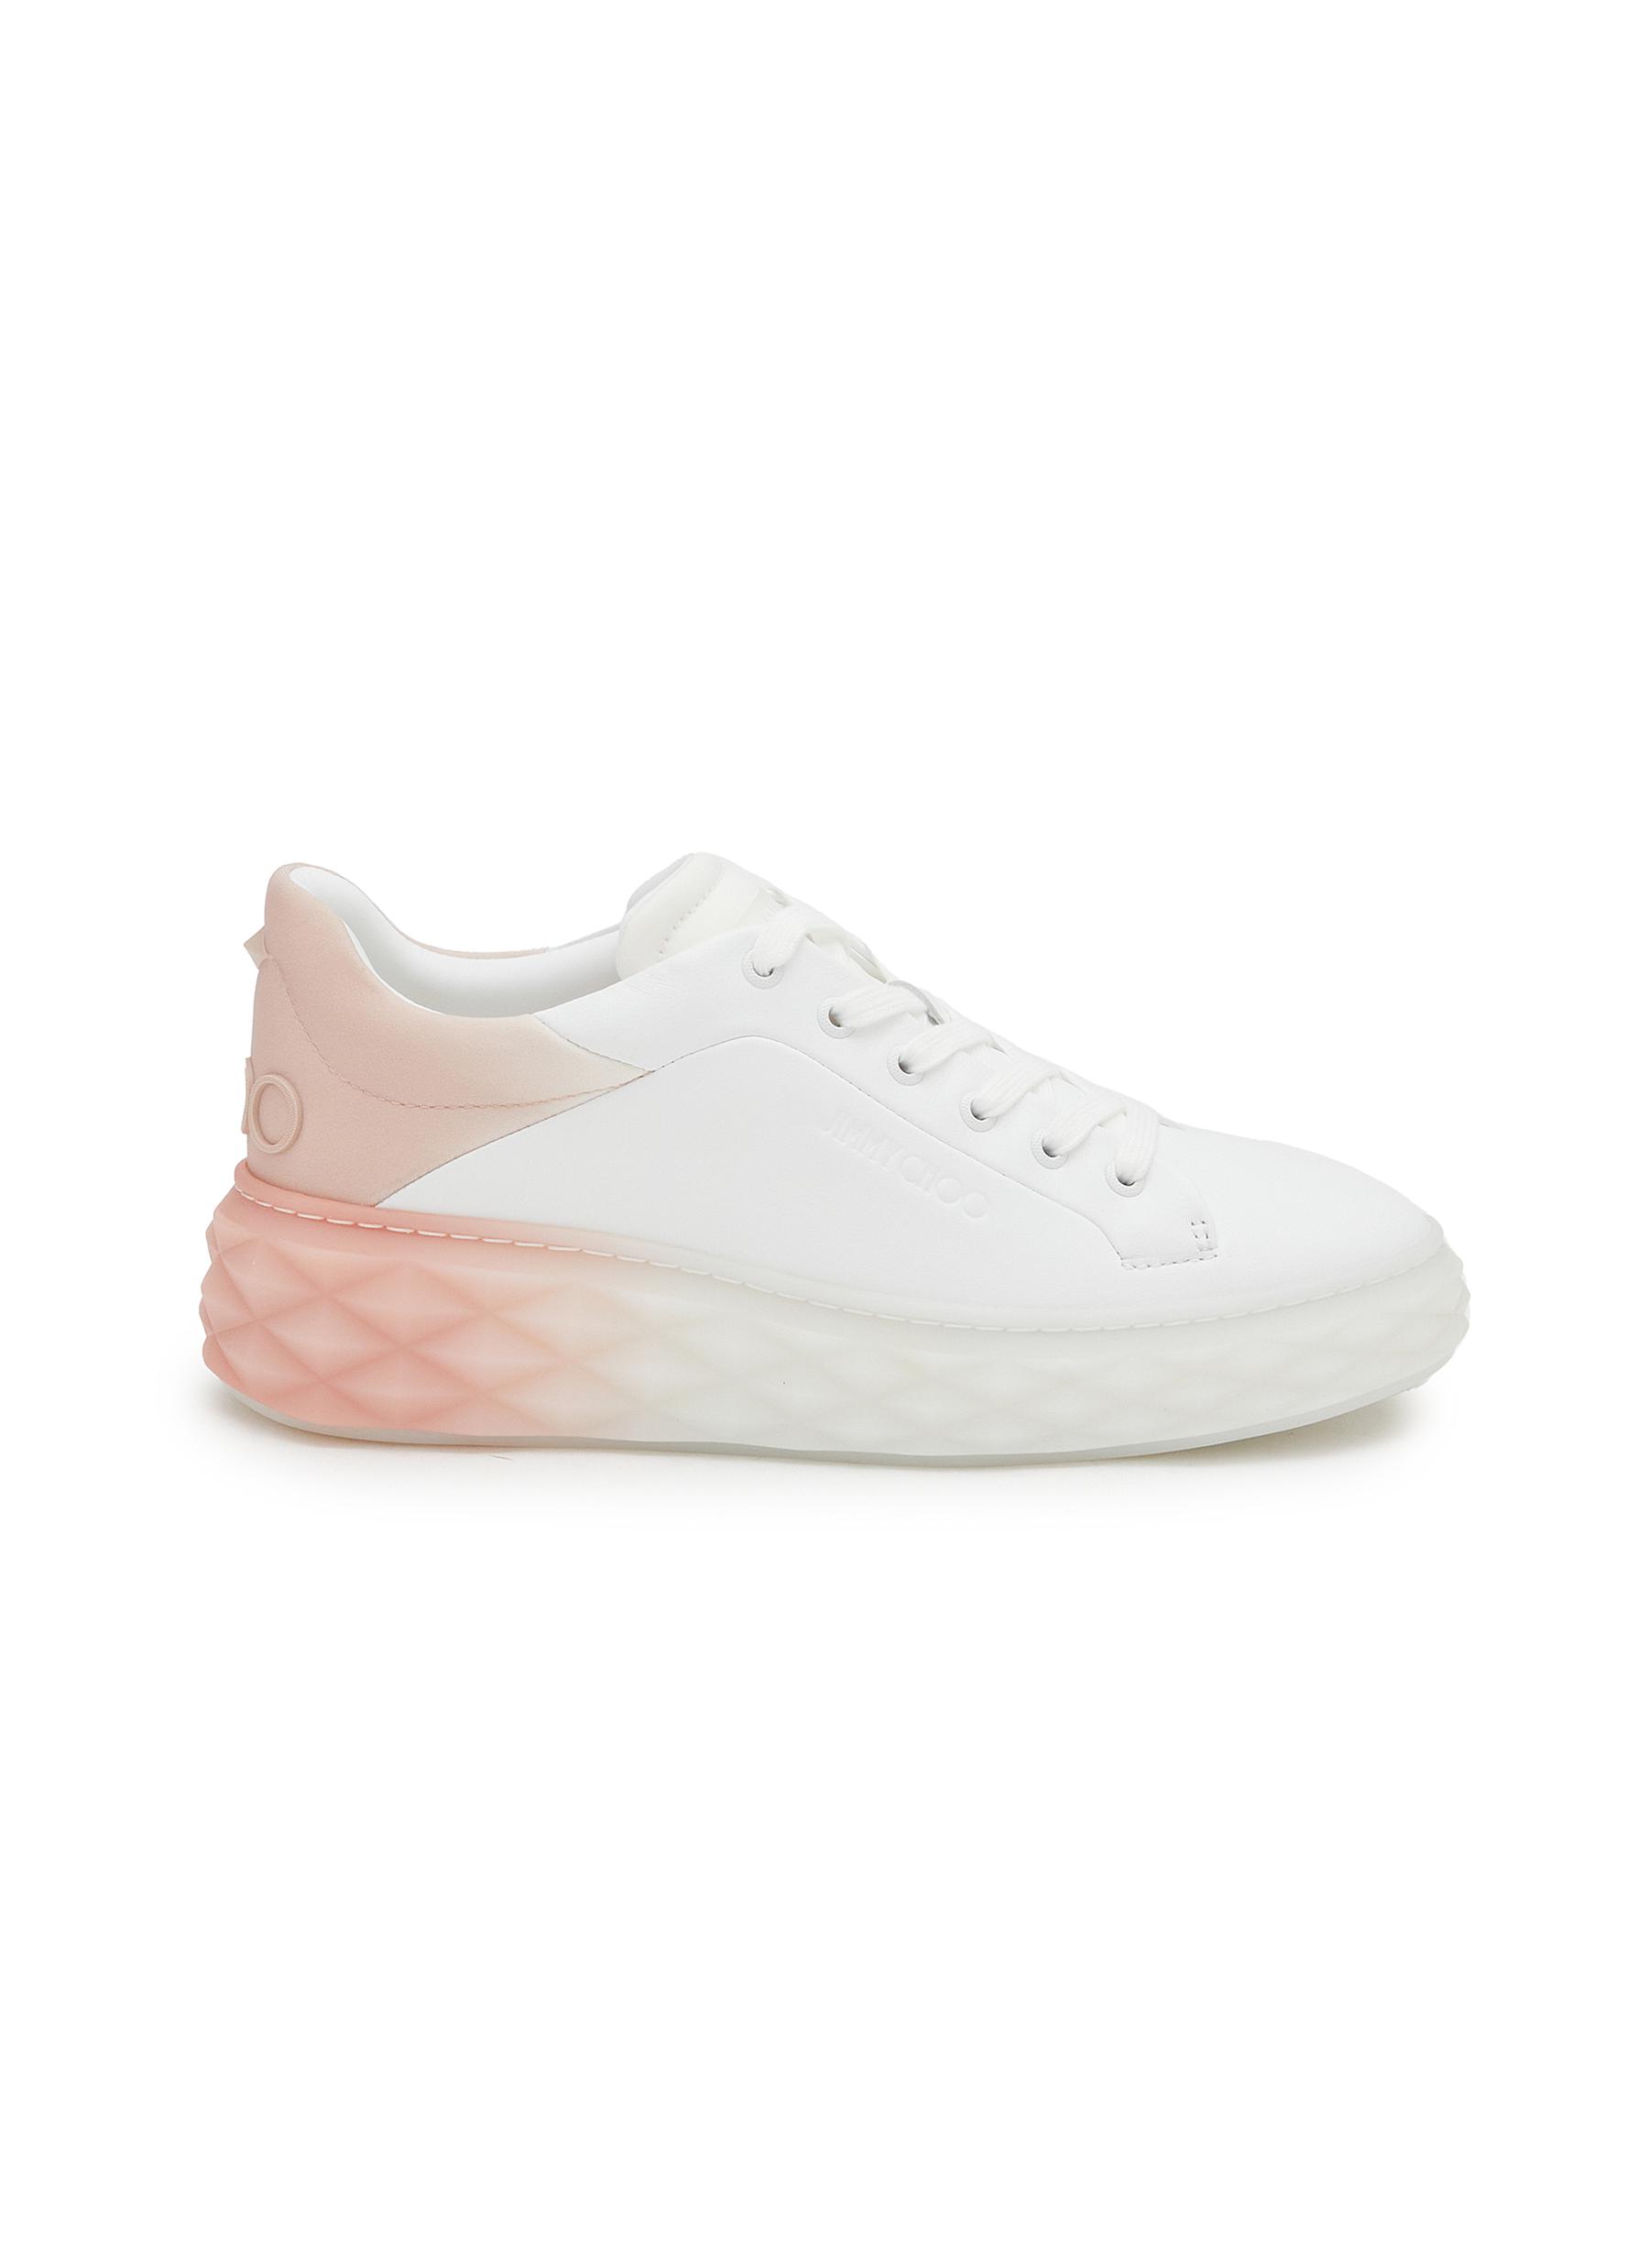 Diamond Maxi/F II Low Top Lace Up Leather Sneaker